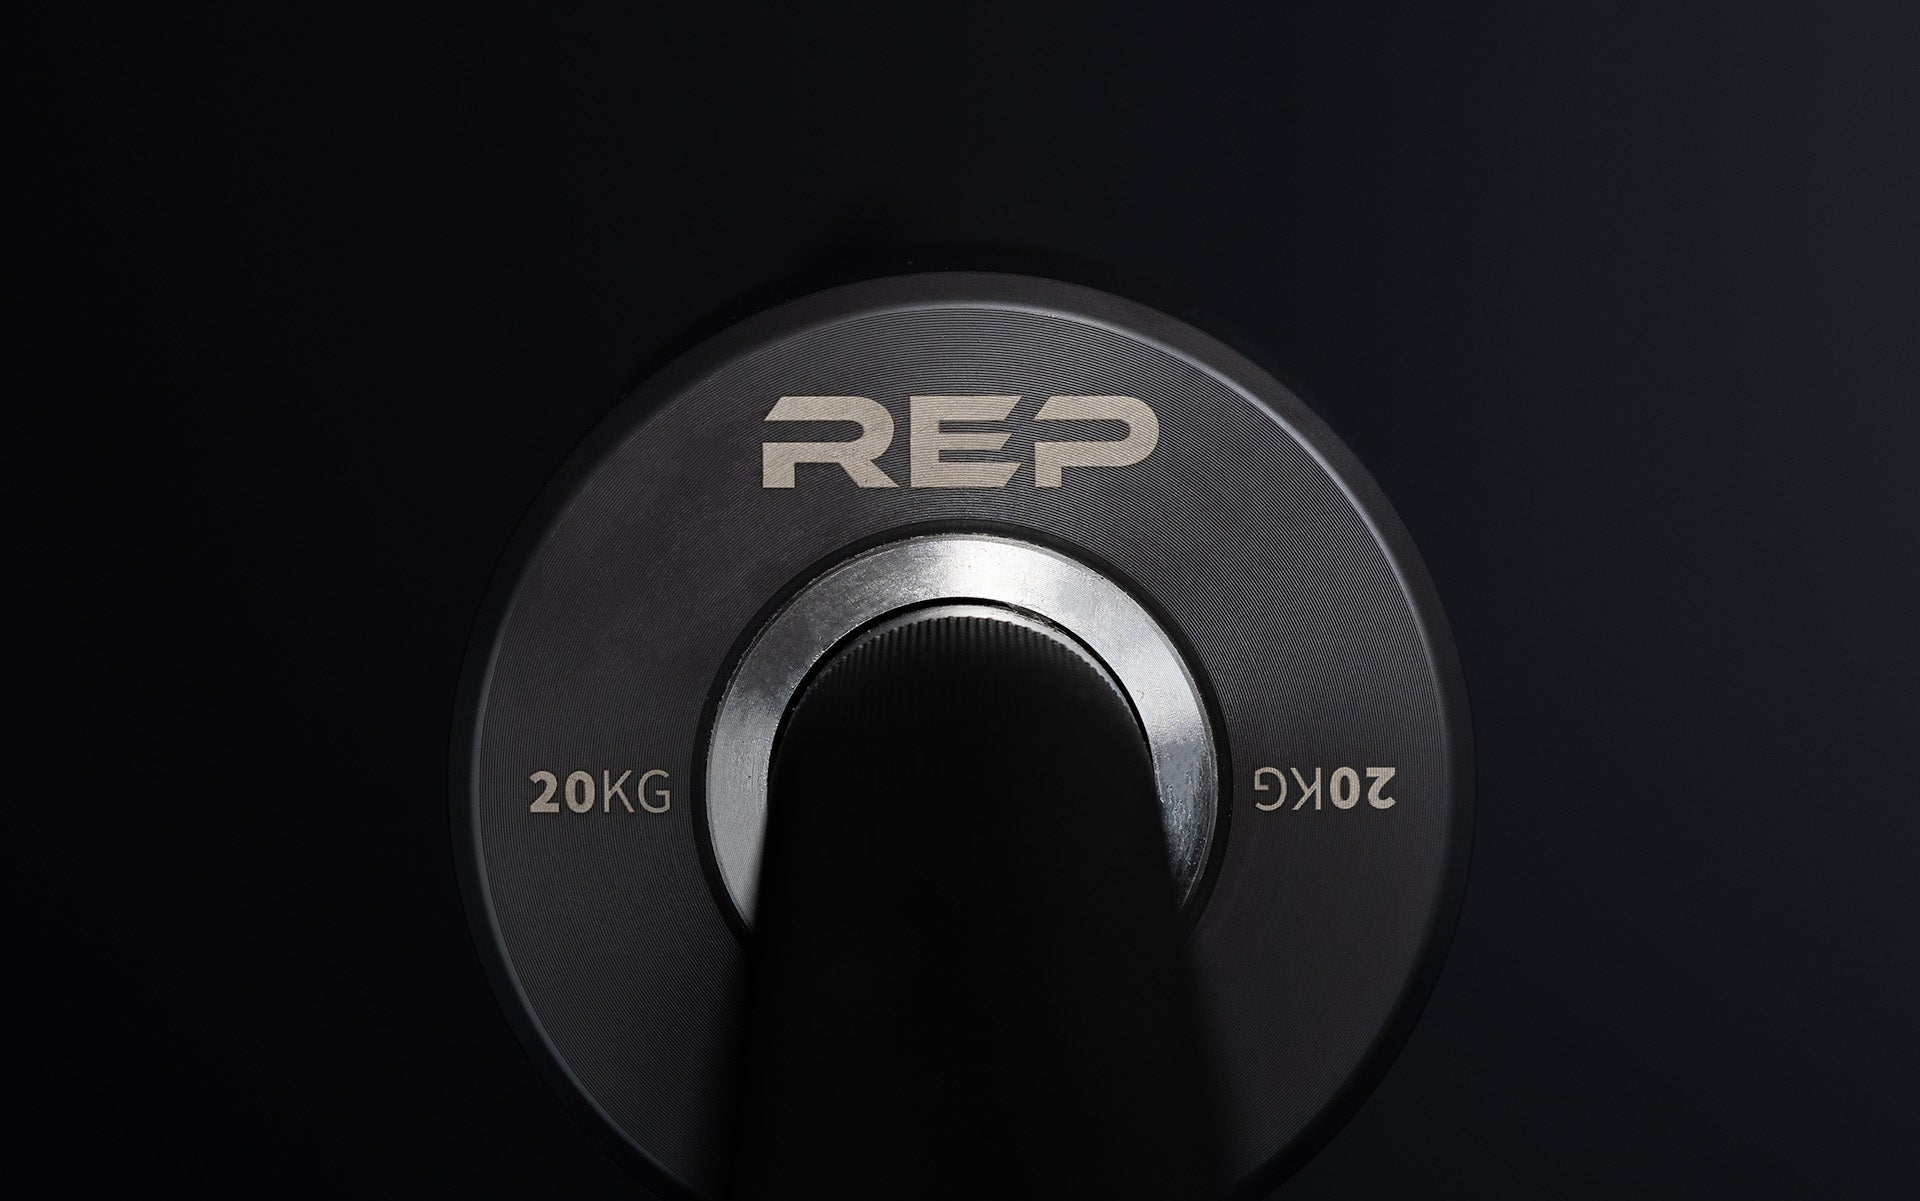 Close-up view of the laser-etched labeling on the inside of the sleeve of a REP Hades Deadlift Bar.